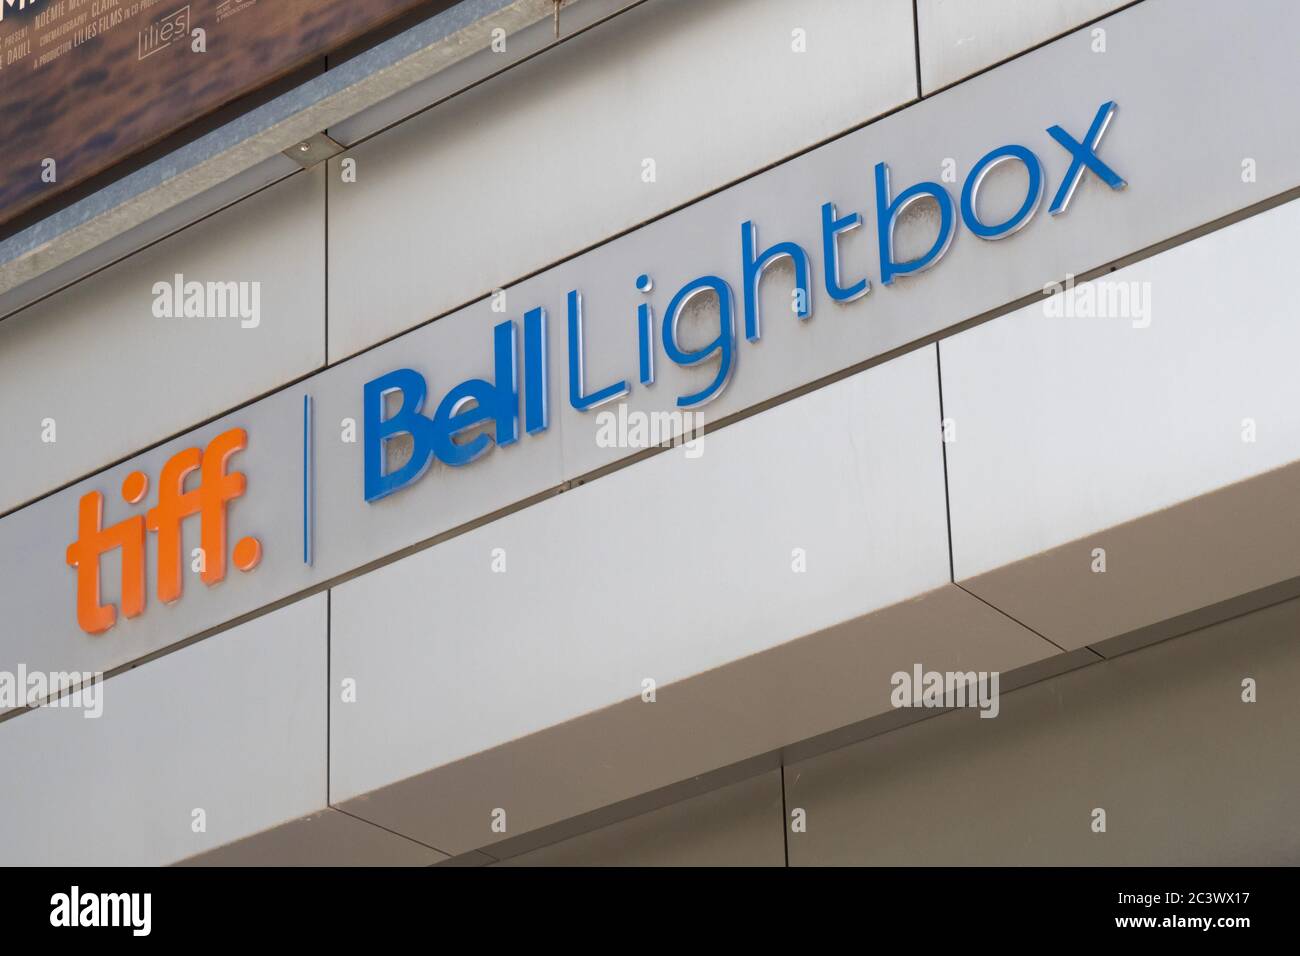 Toronto, Canada, June 14, 2020; The colorful TIFF logo and sign of the Toronto International Film Festival, Bell LIghtbox theater in the entertainment Stock Photo